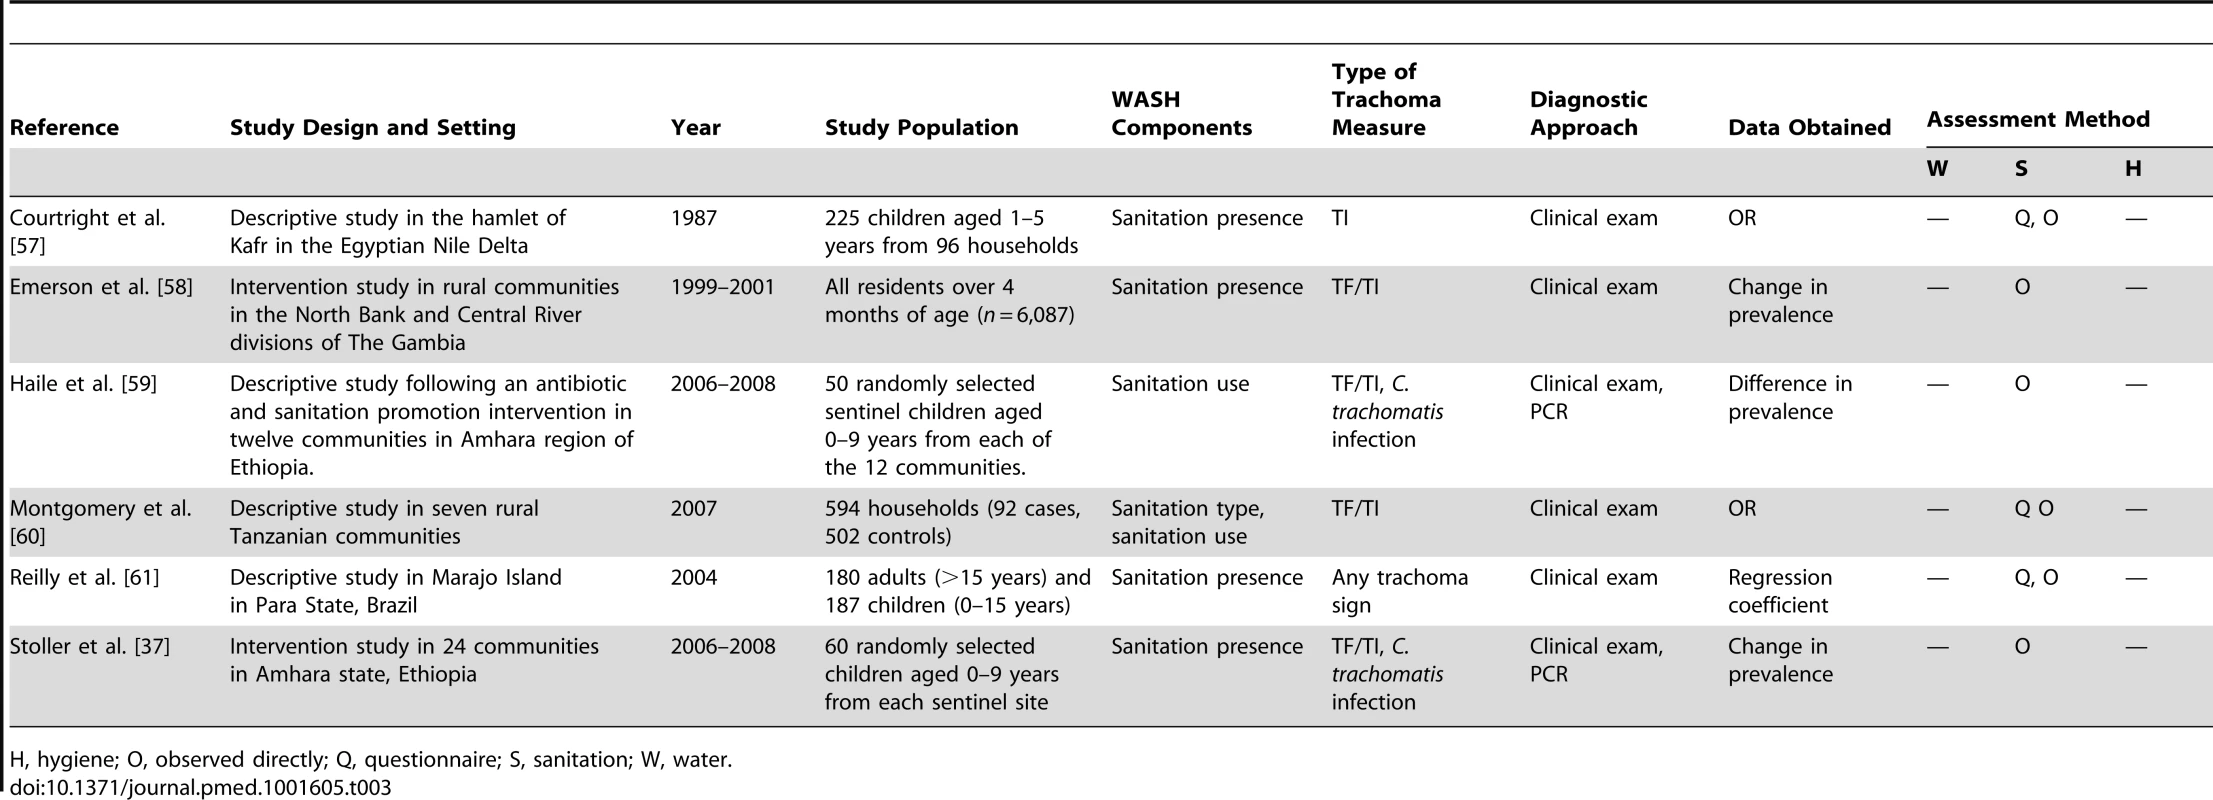 Summary of publications reporting only on sanitation-related risk factors.